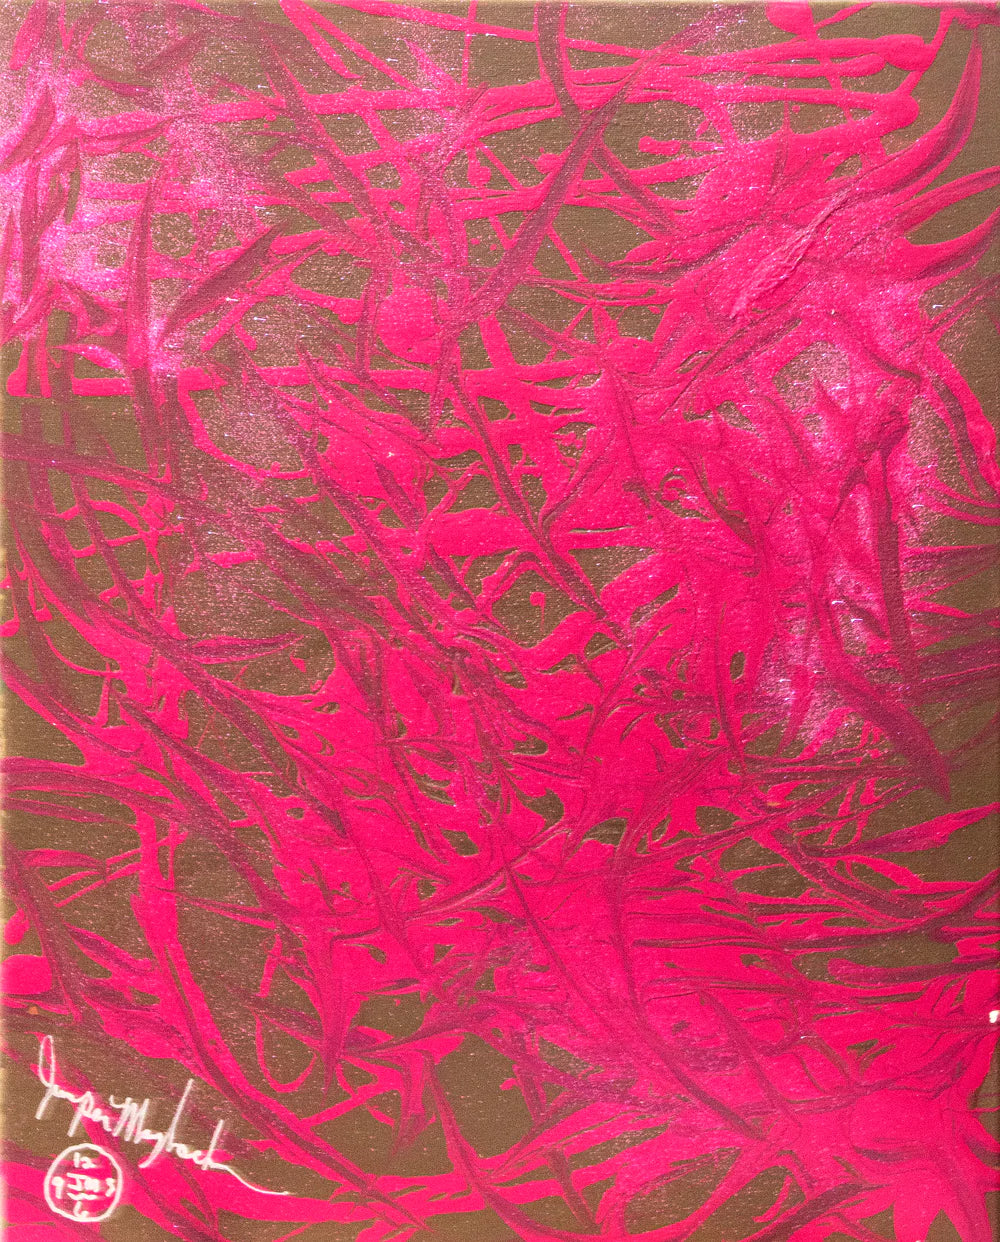 Pink Fun
There pretty in pink then there is fun when your play wearing pink and eating chocolate.
16” x 20”
Acrylic Mixed Media on stretched canvas
Do you own a JumpPink Fun         PNTArtworkJumper MaybachJumper Maybach